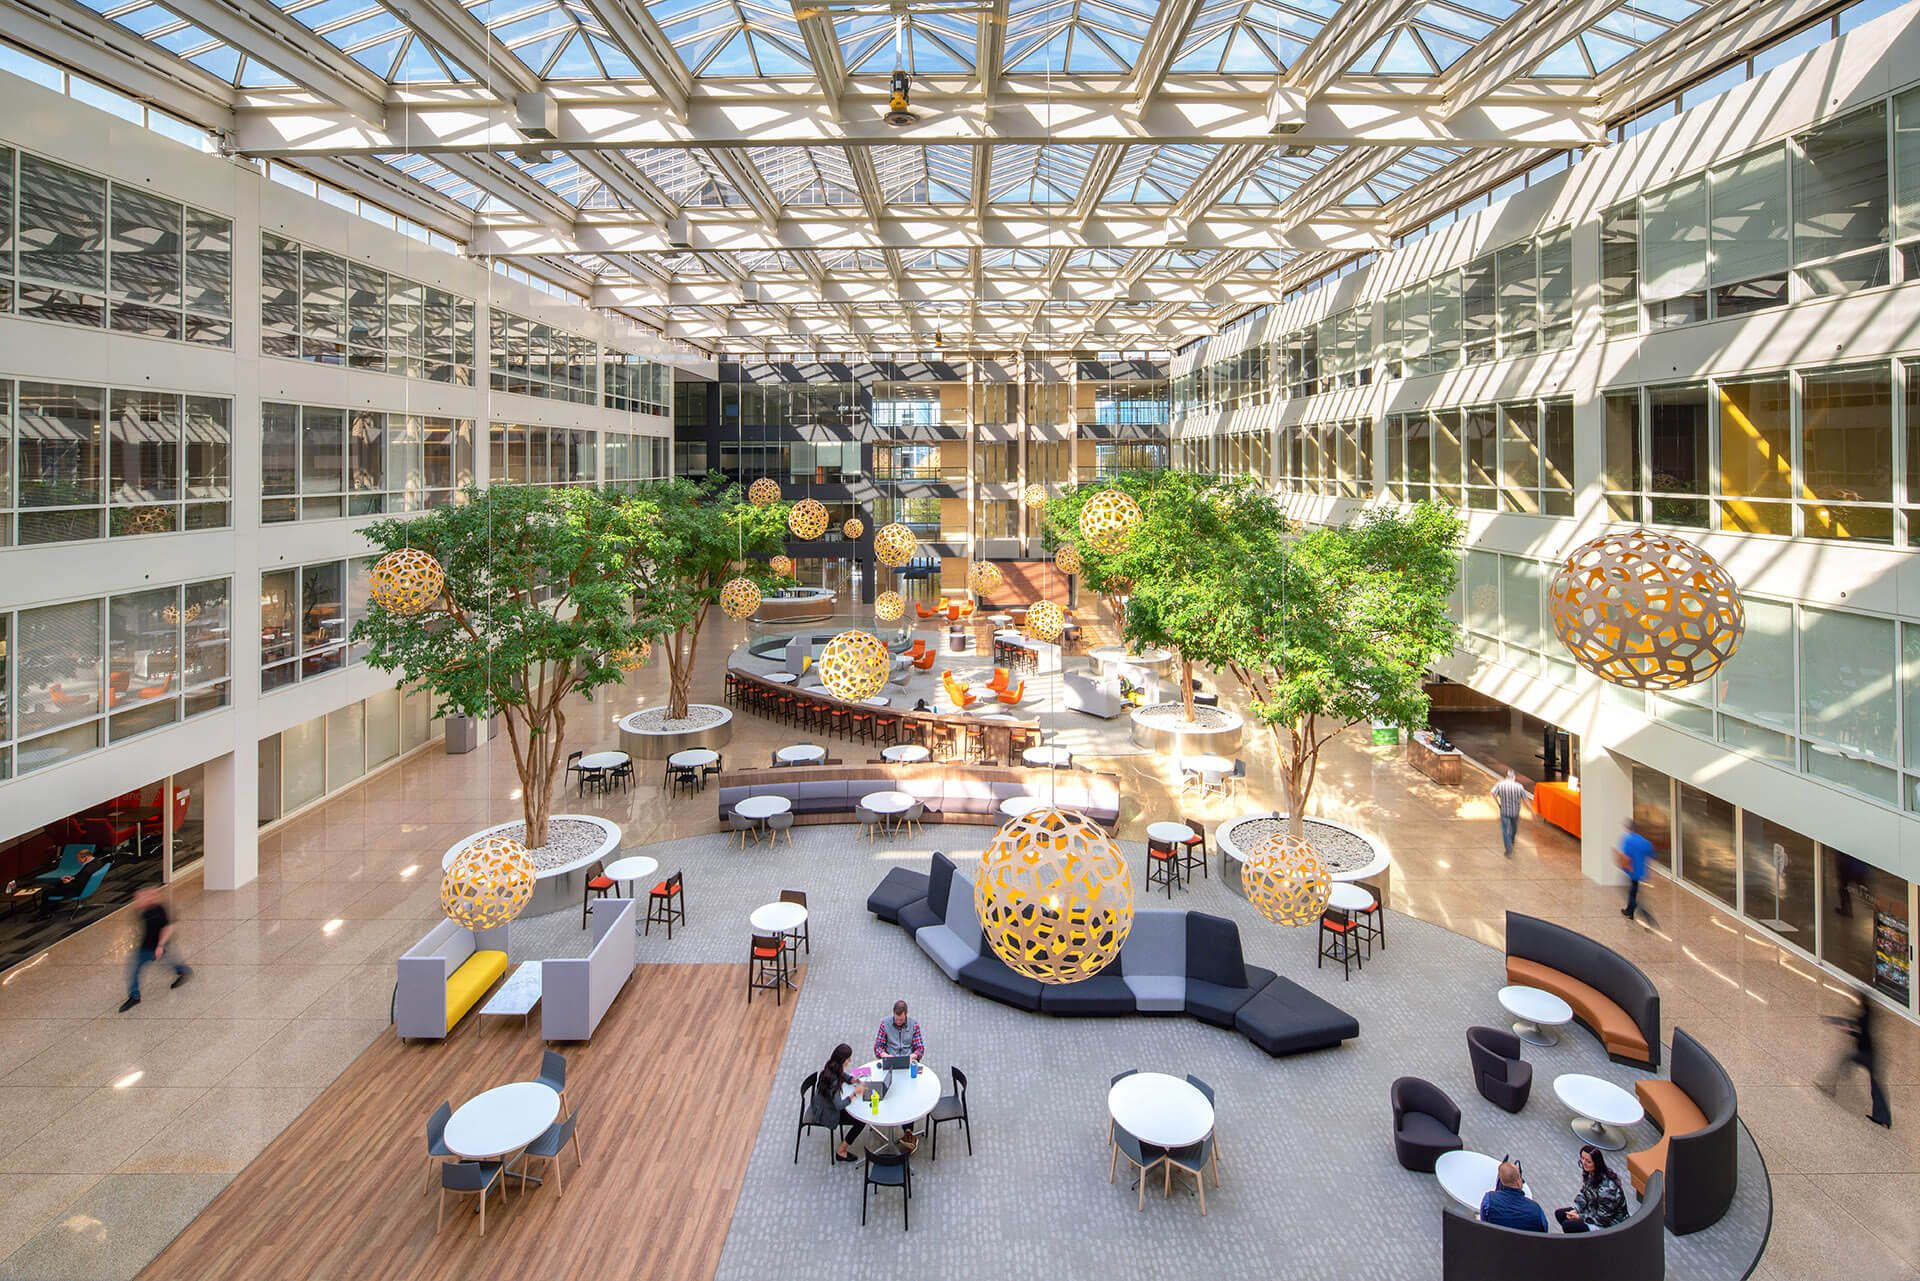 The light filled atrium of the schaumburg corporate center office building.